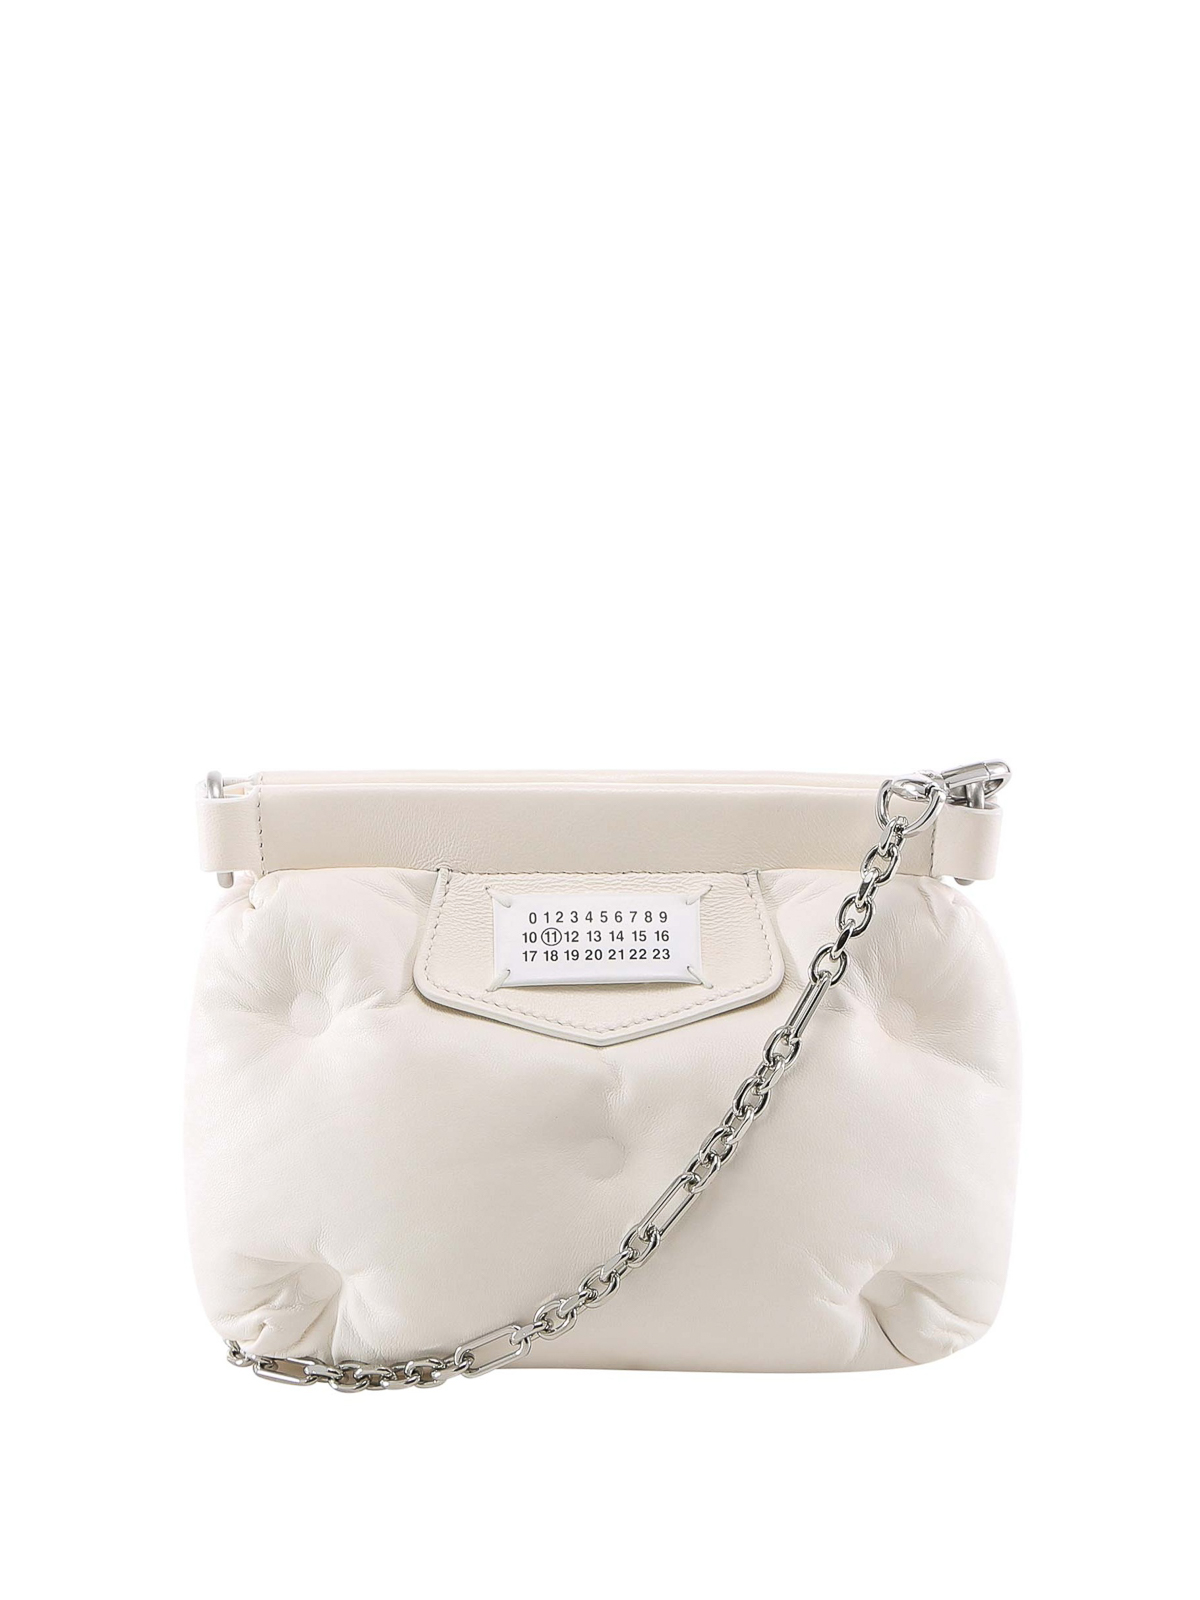 Cross body bags Maison Margiela - Quilted leather crossbody bag